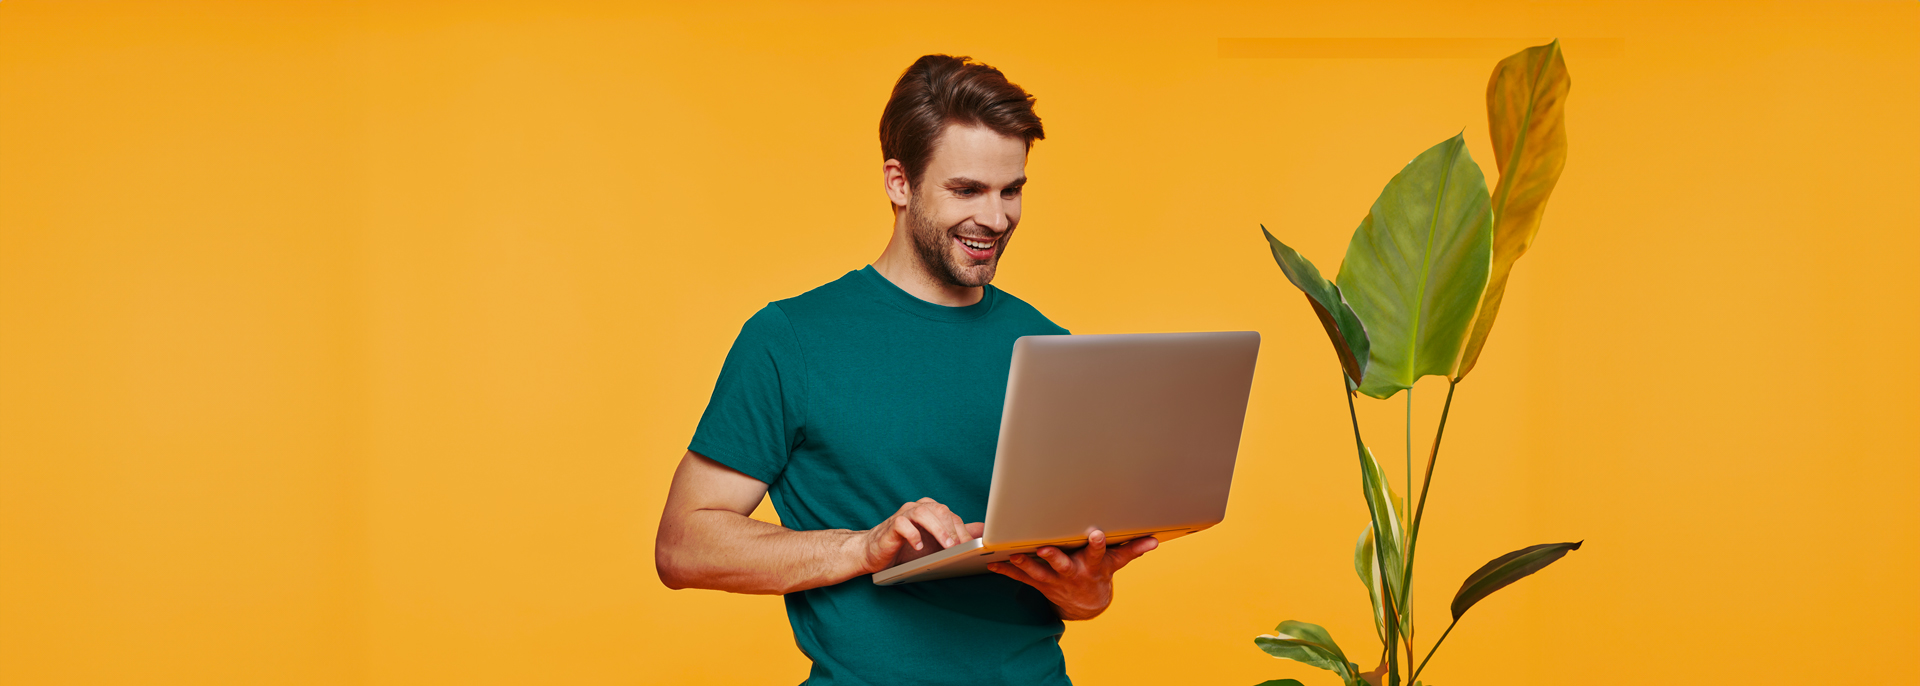 Handsome Young Man Casual Clothing Using Laptop Smiling While Standing Against Yellow Wall